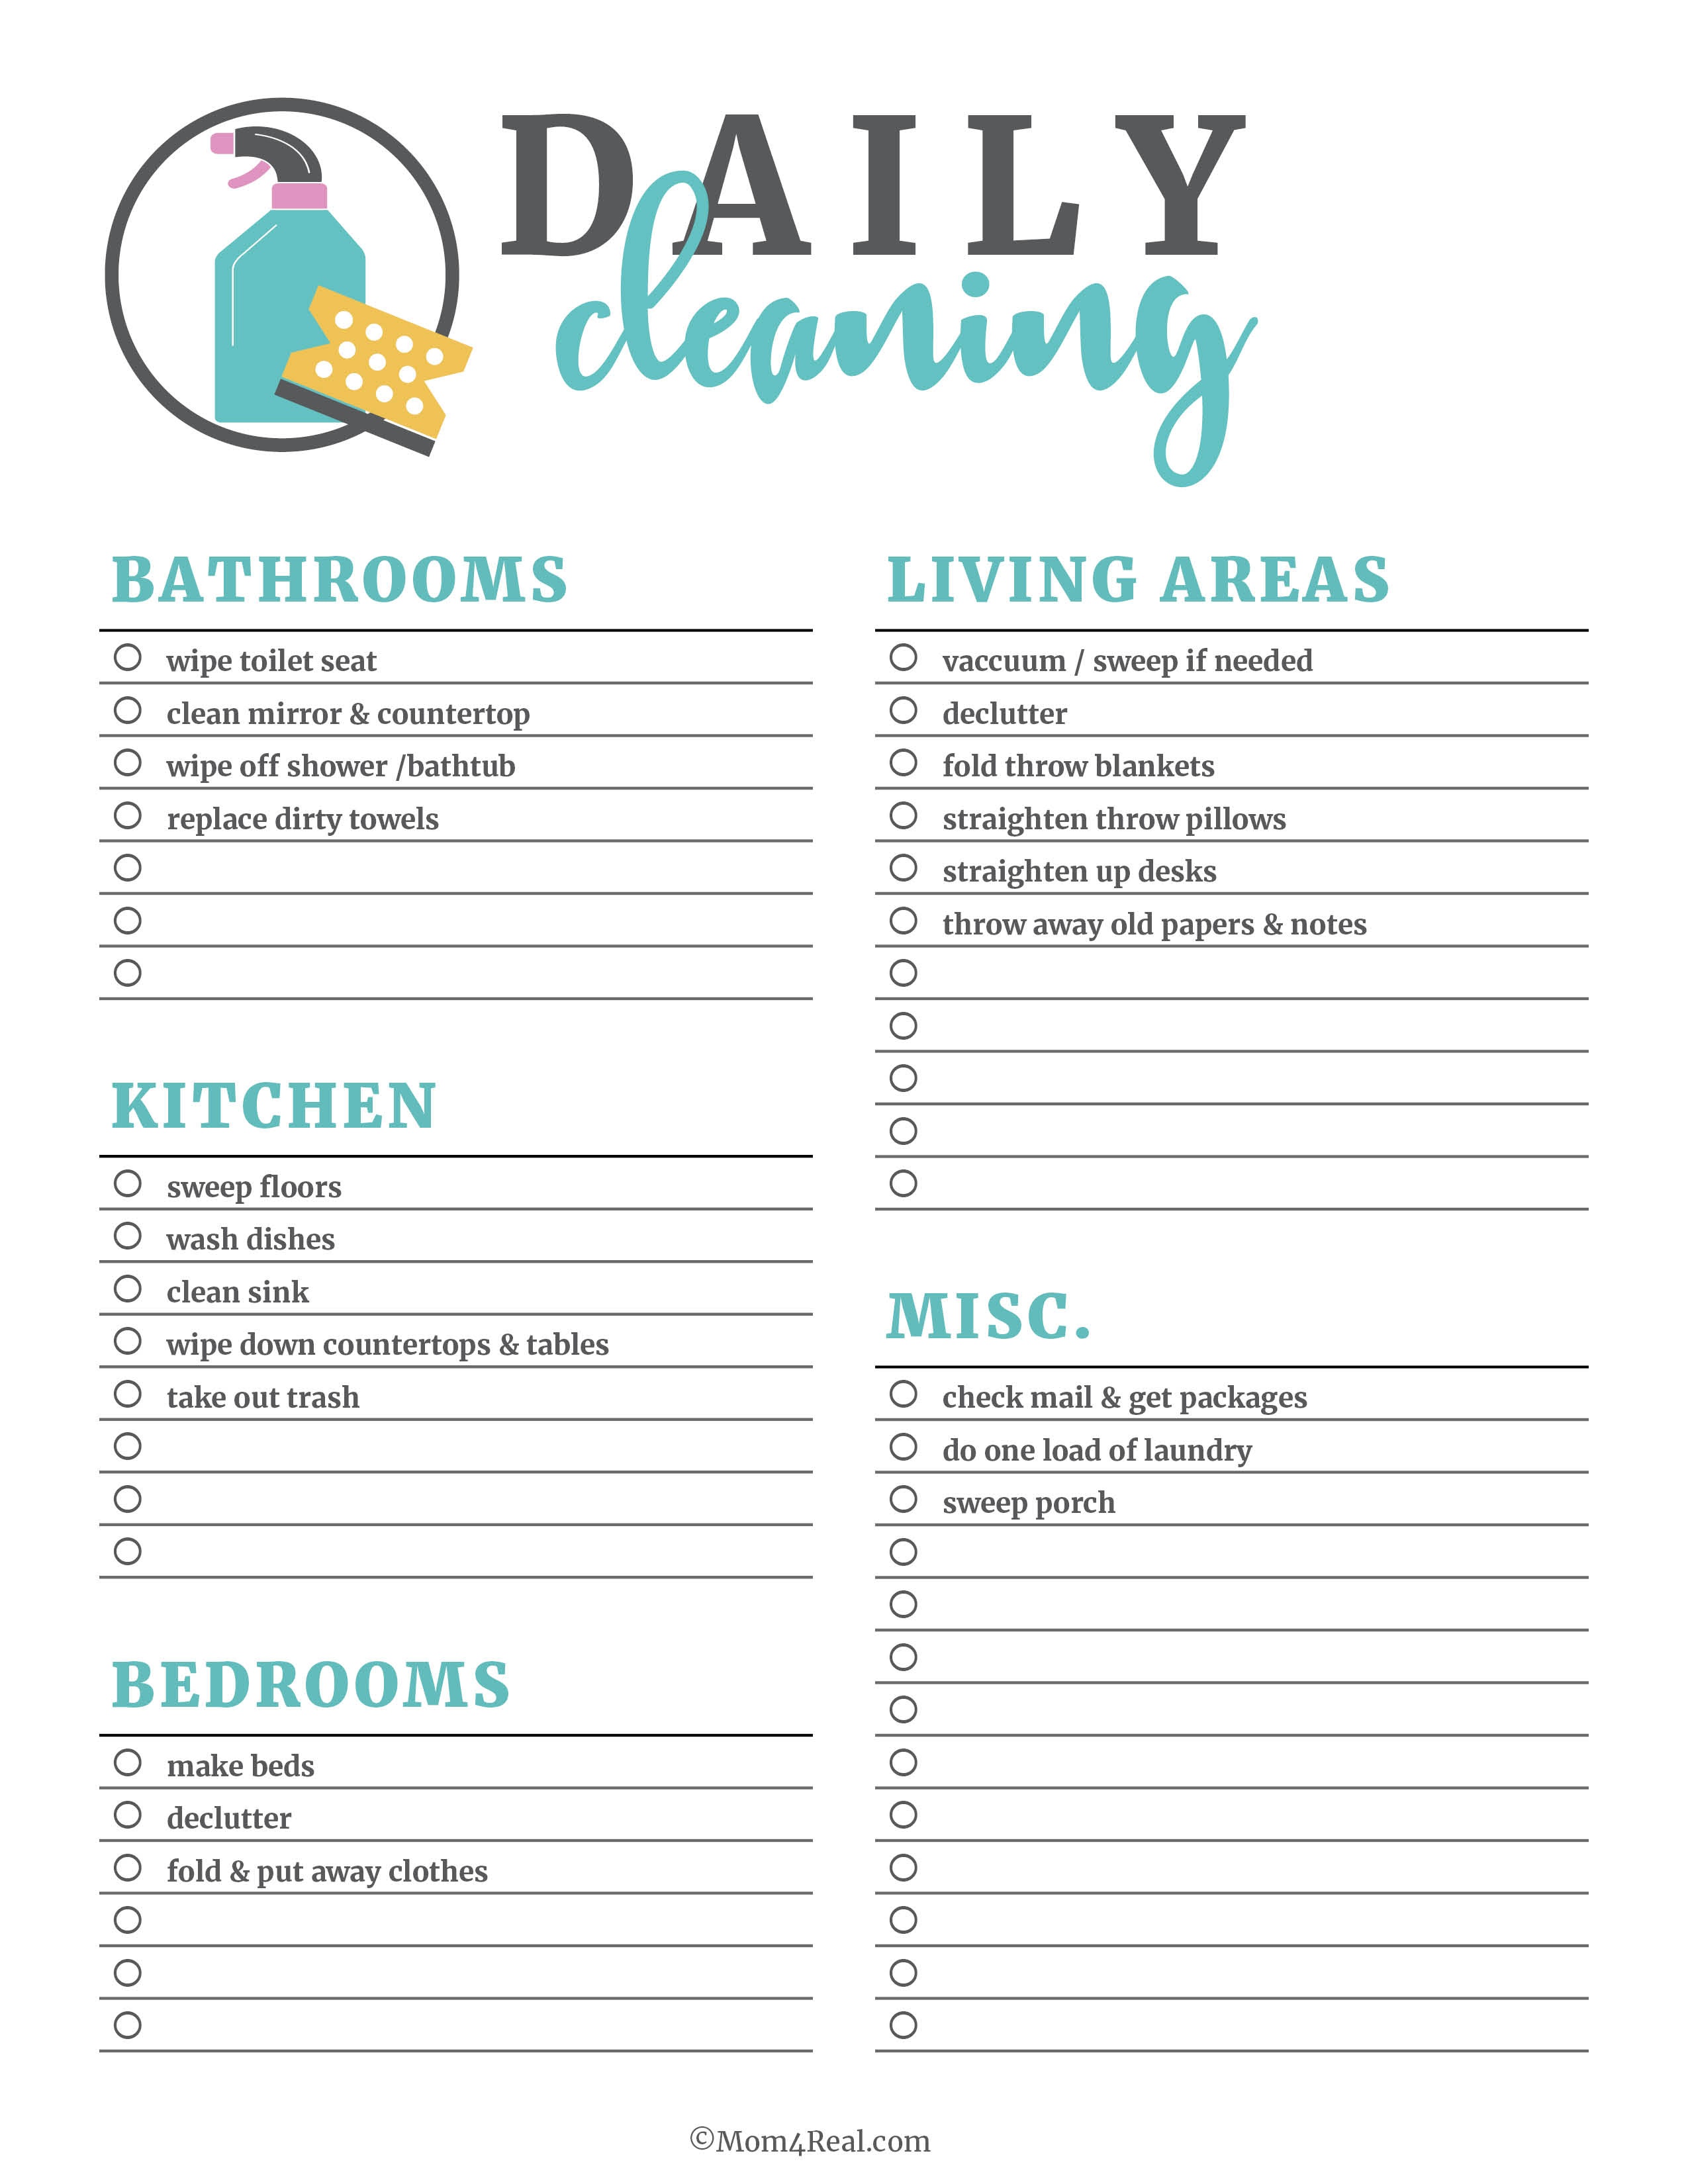 The Best Free Printable Cleaning Checklists - Sarah Titus - Free